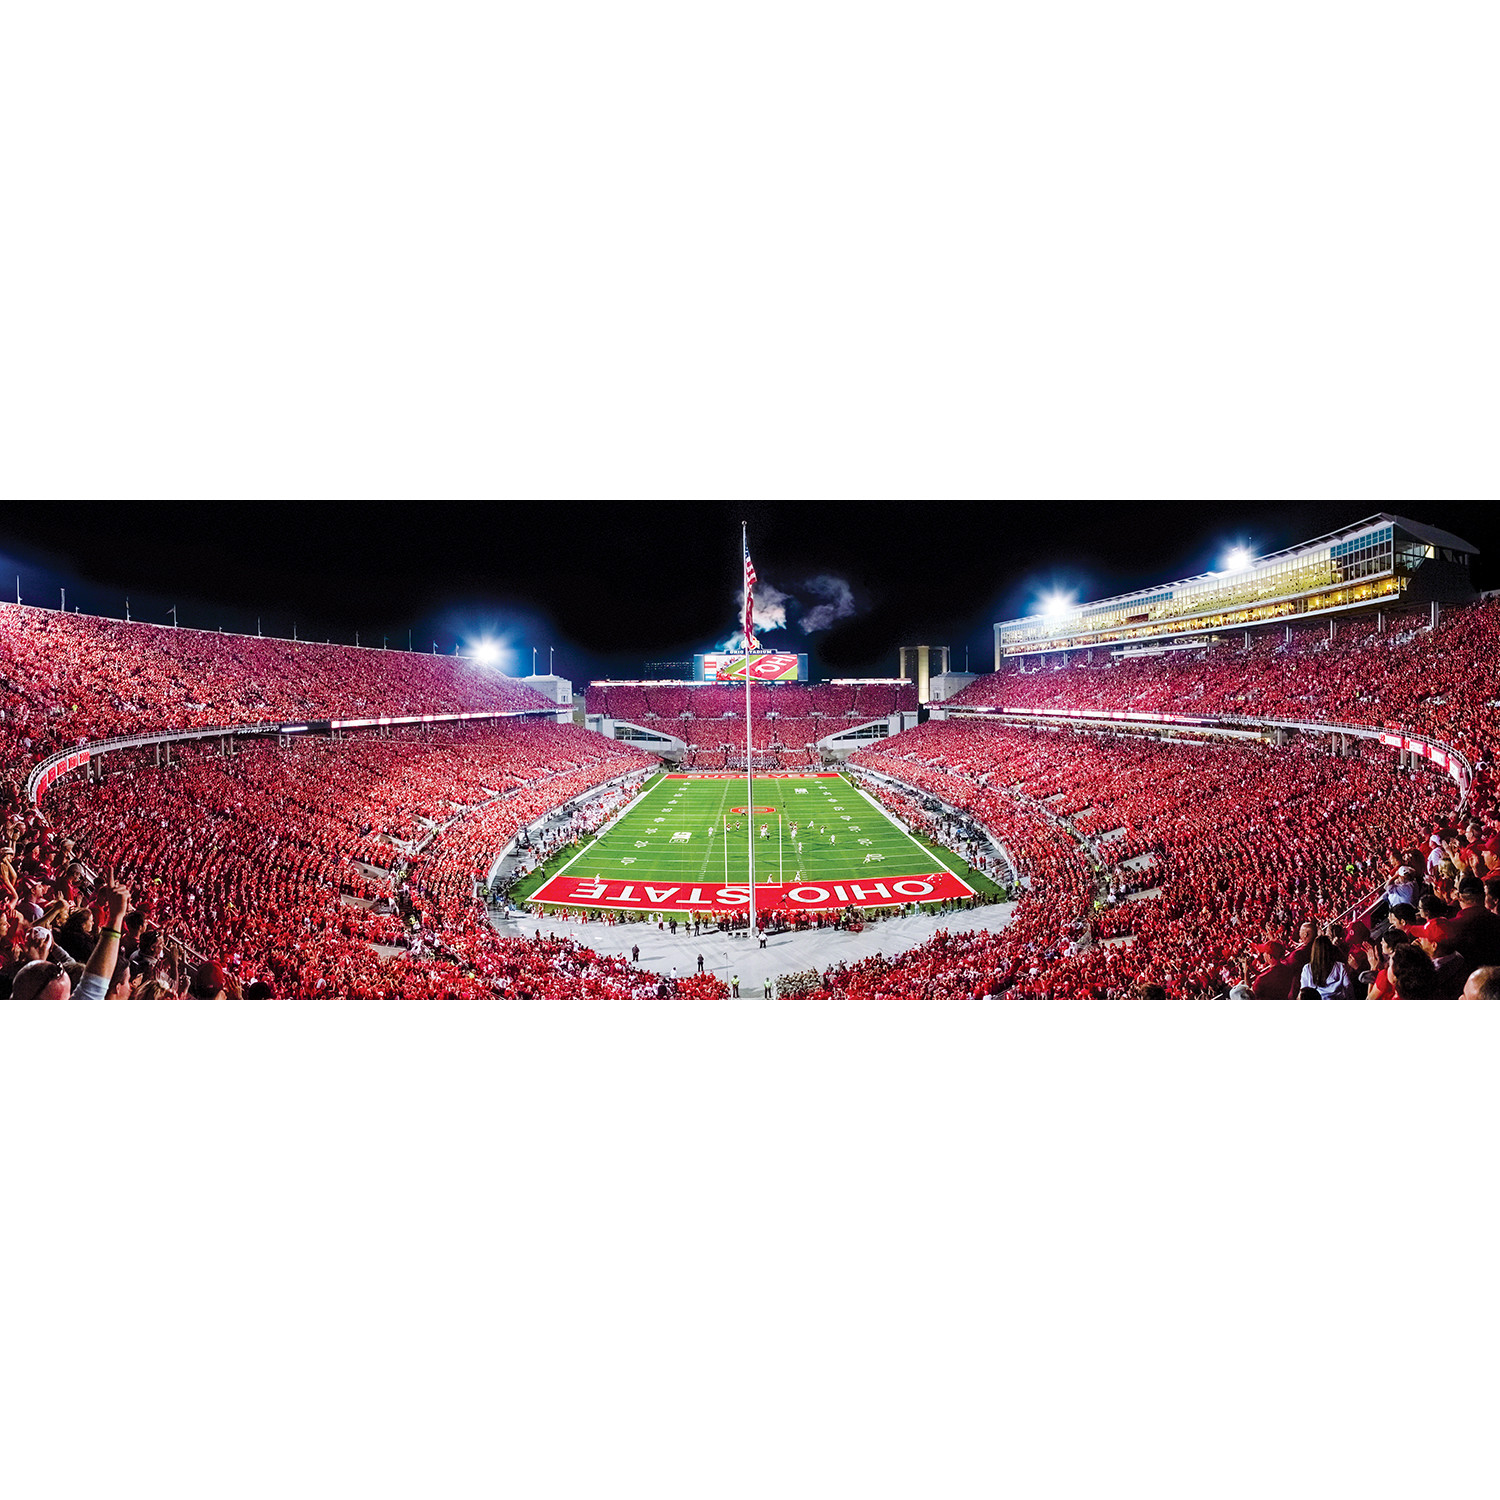 MasterPieces Panoramic Puzzle - NCAA Ohio State Buckeyes Endzone View - image 3 of 4